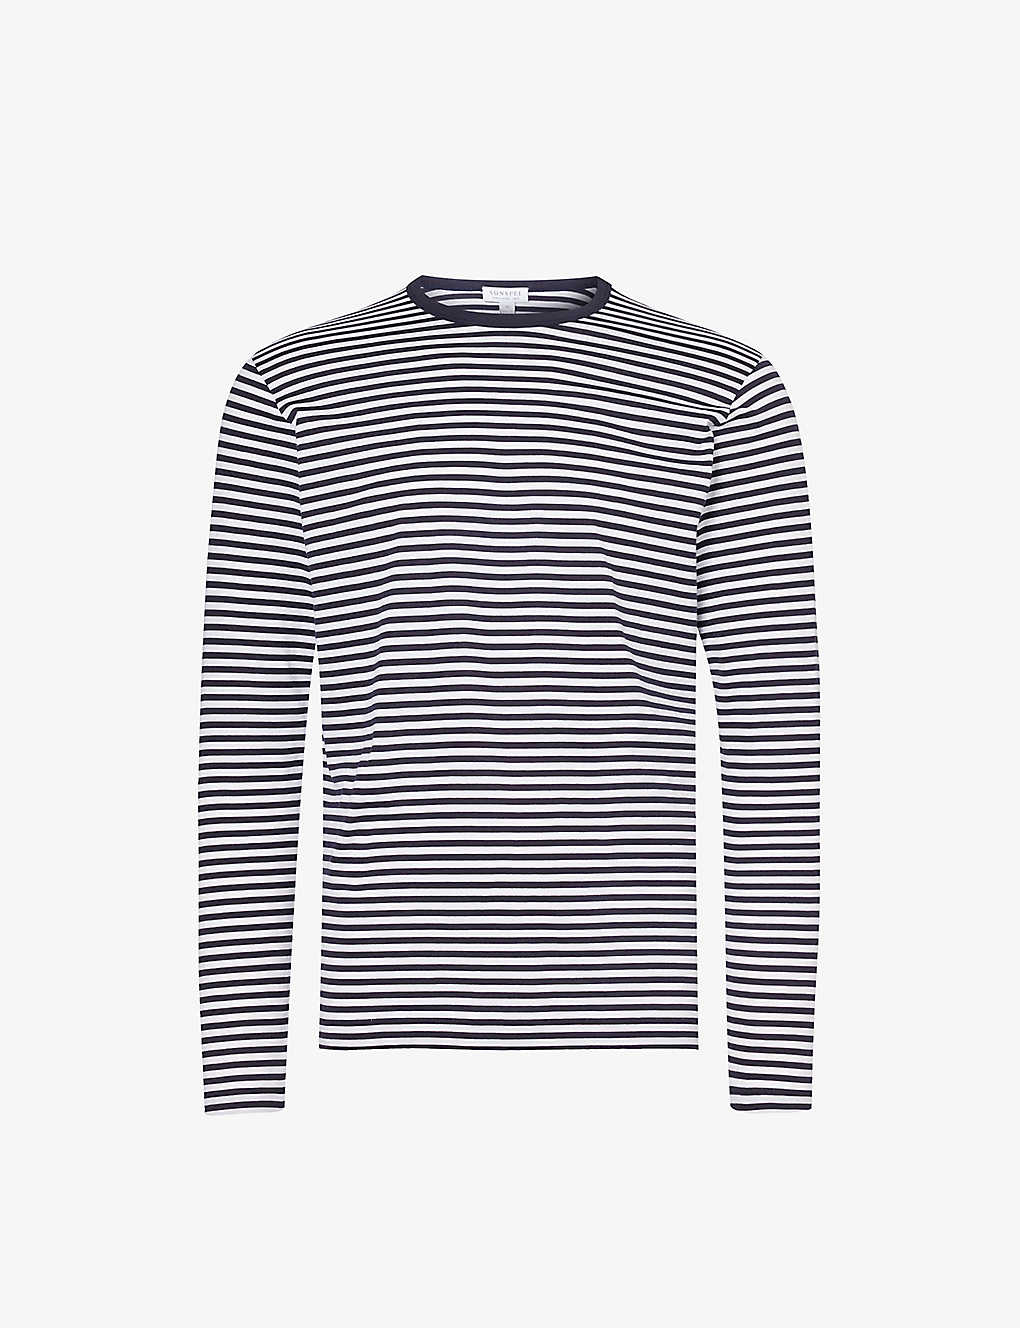 Sunspel Striped Cotton-jersey Long-sleeved T-shirt In White/navy